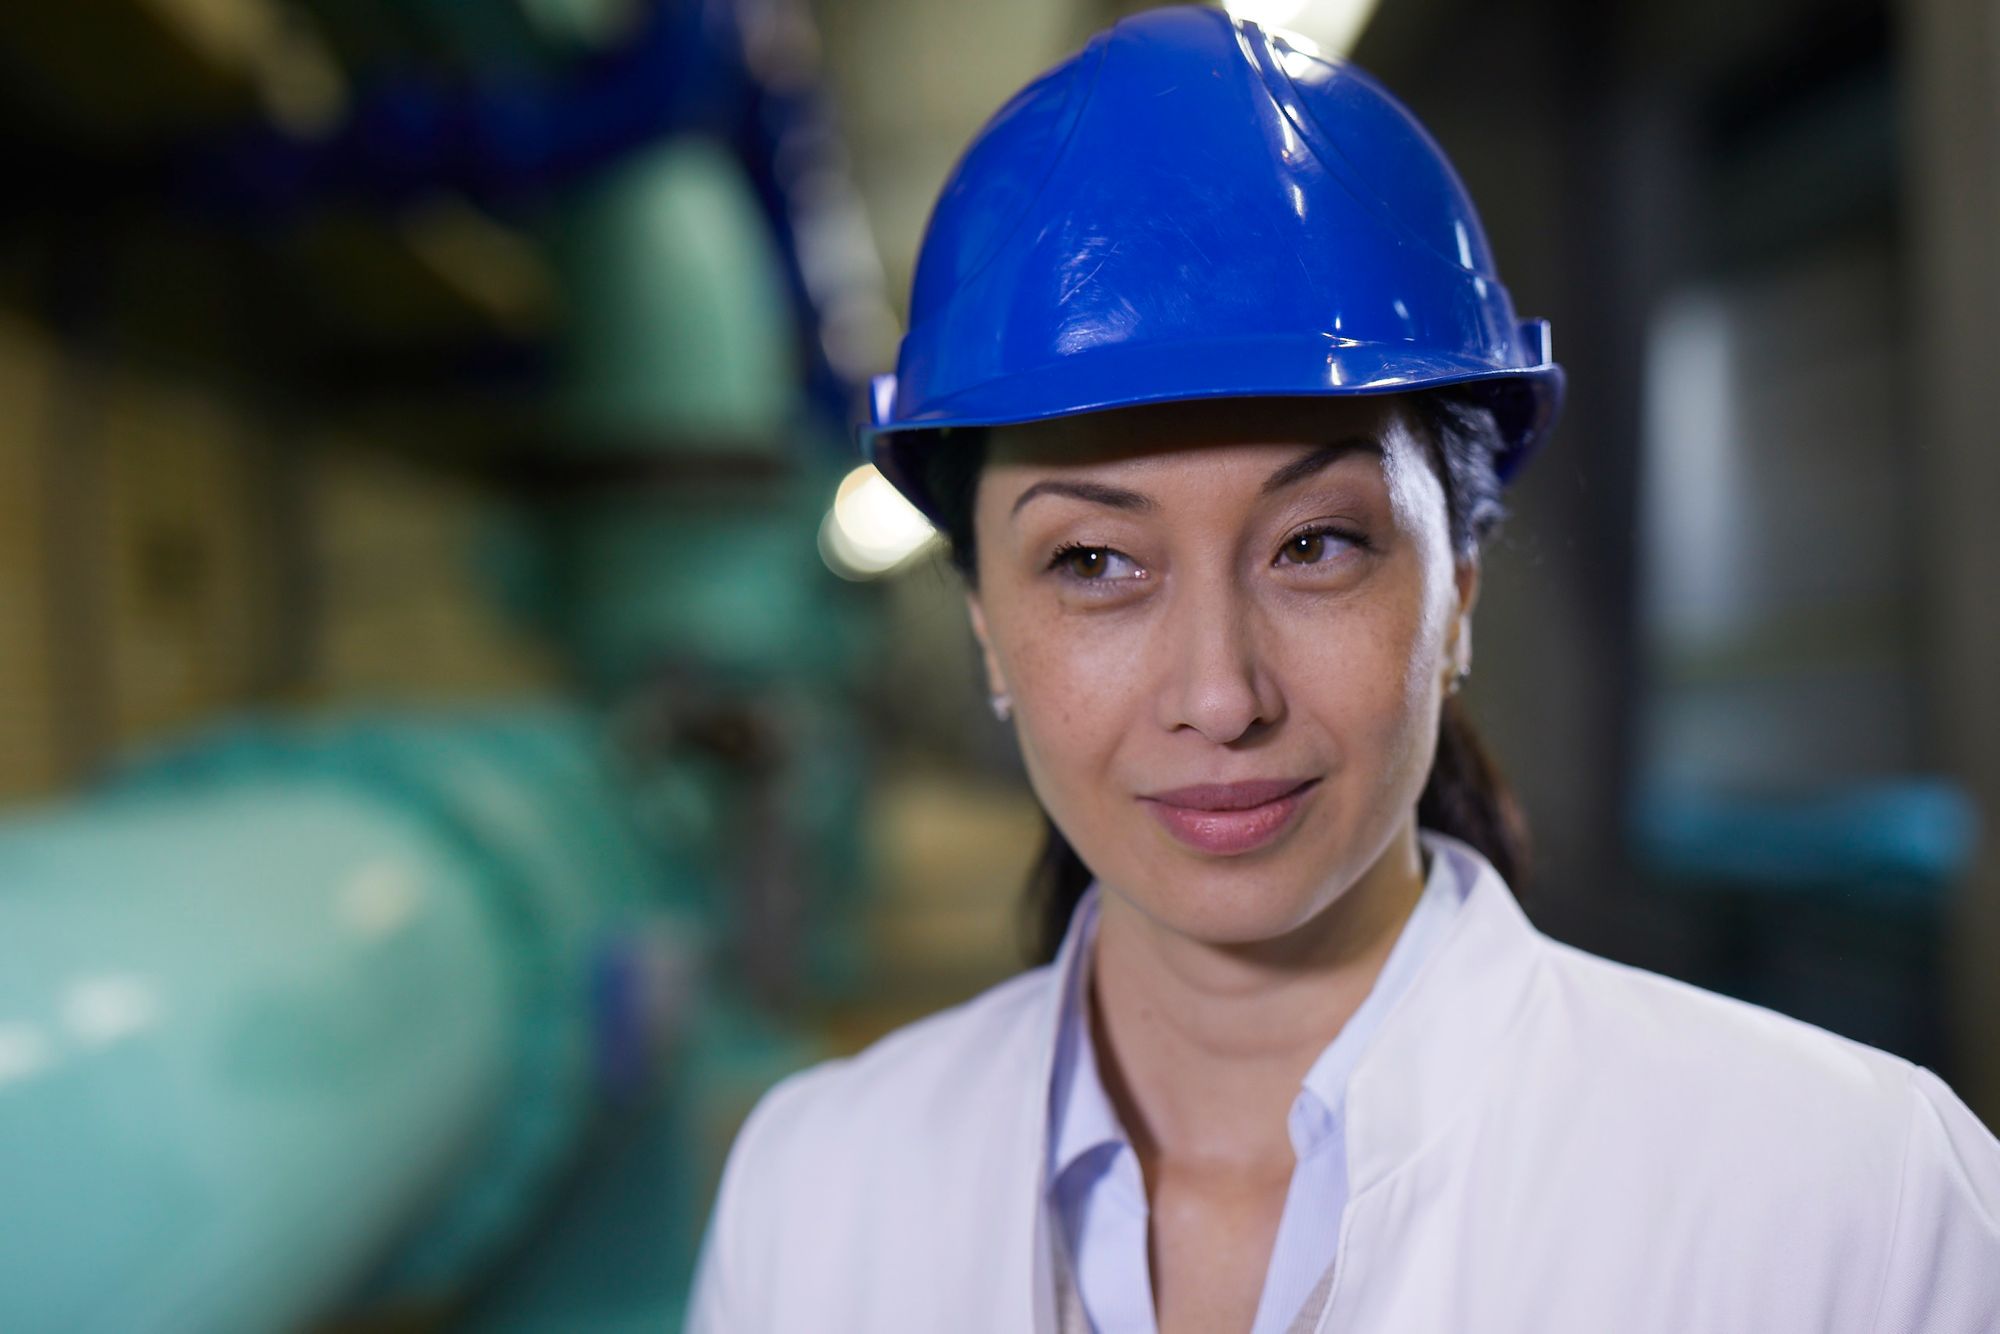 How can IIoT change your daily life? 
Improving operational efficiency with Industrial IoT